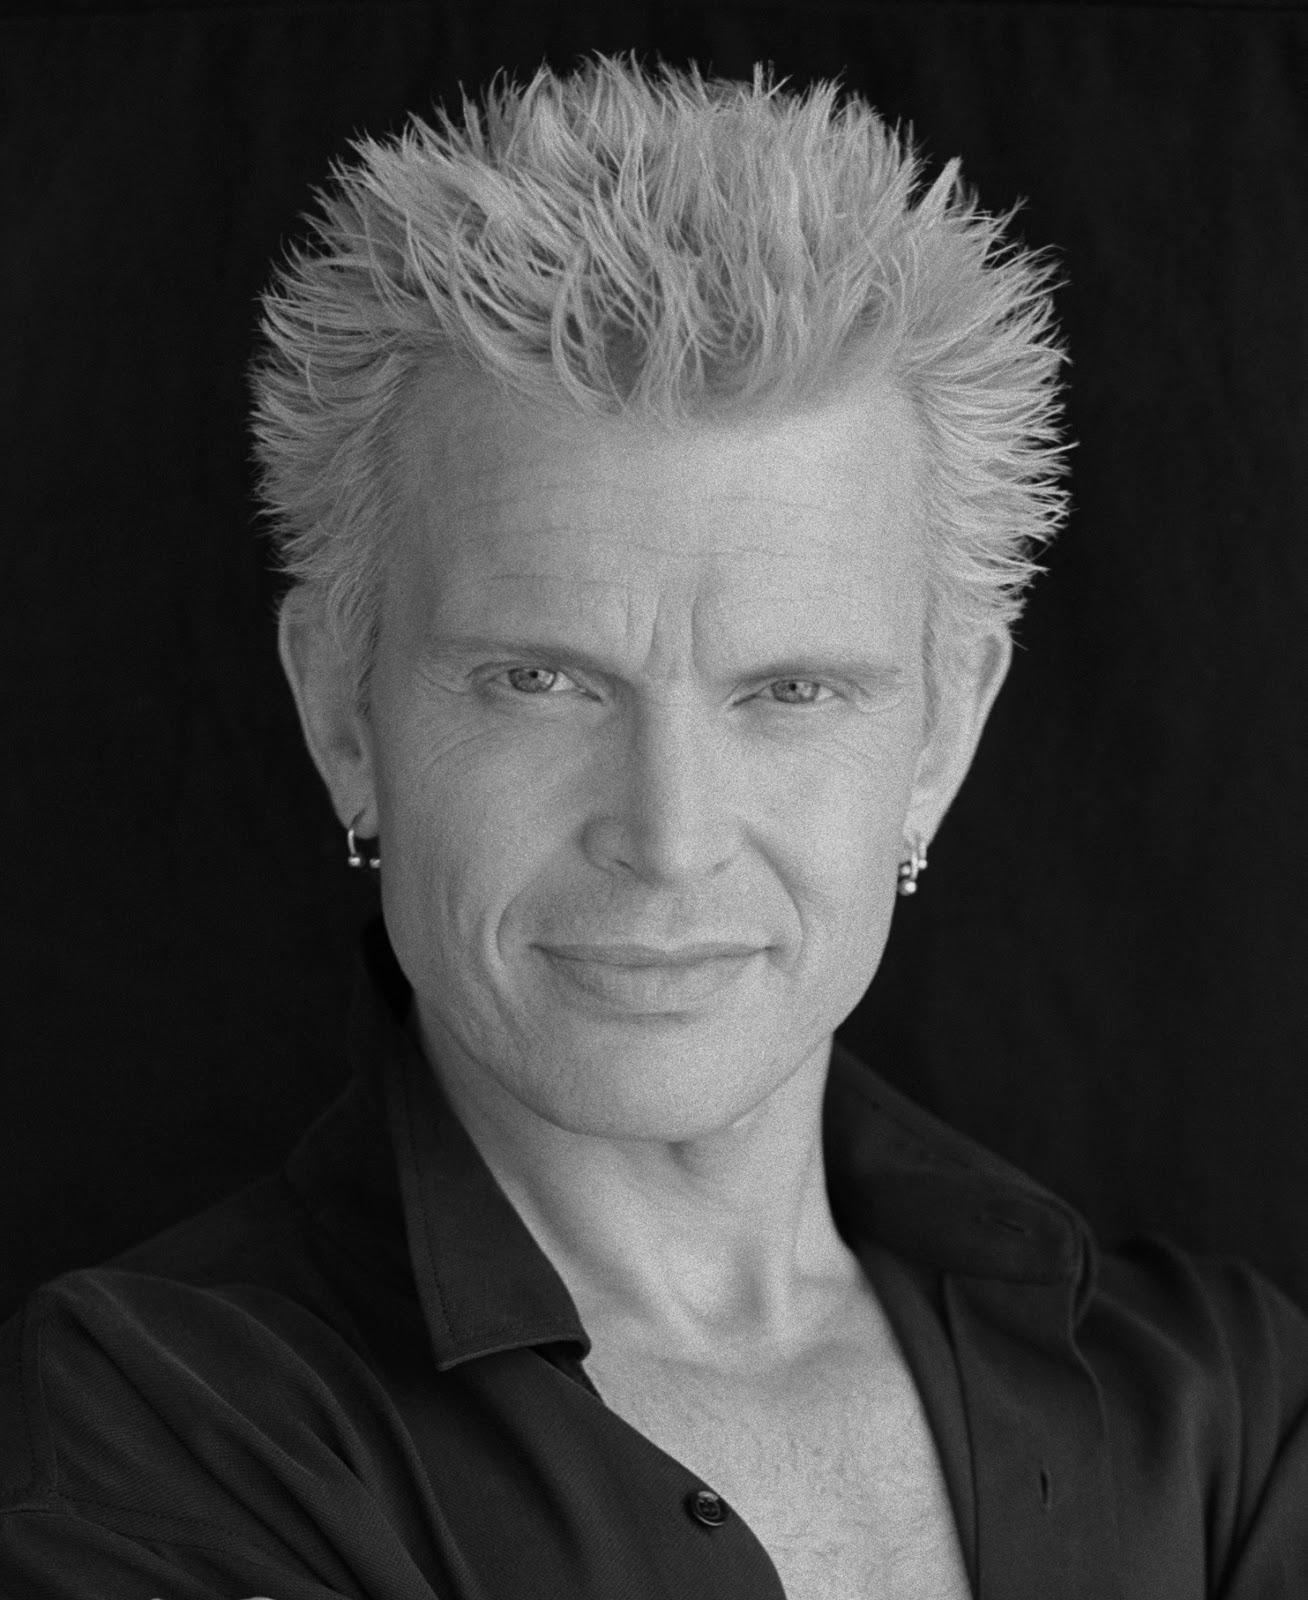 Billy Idol Wallpapers High Quality.